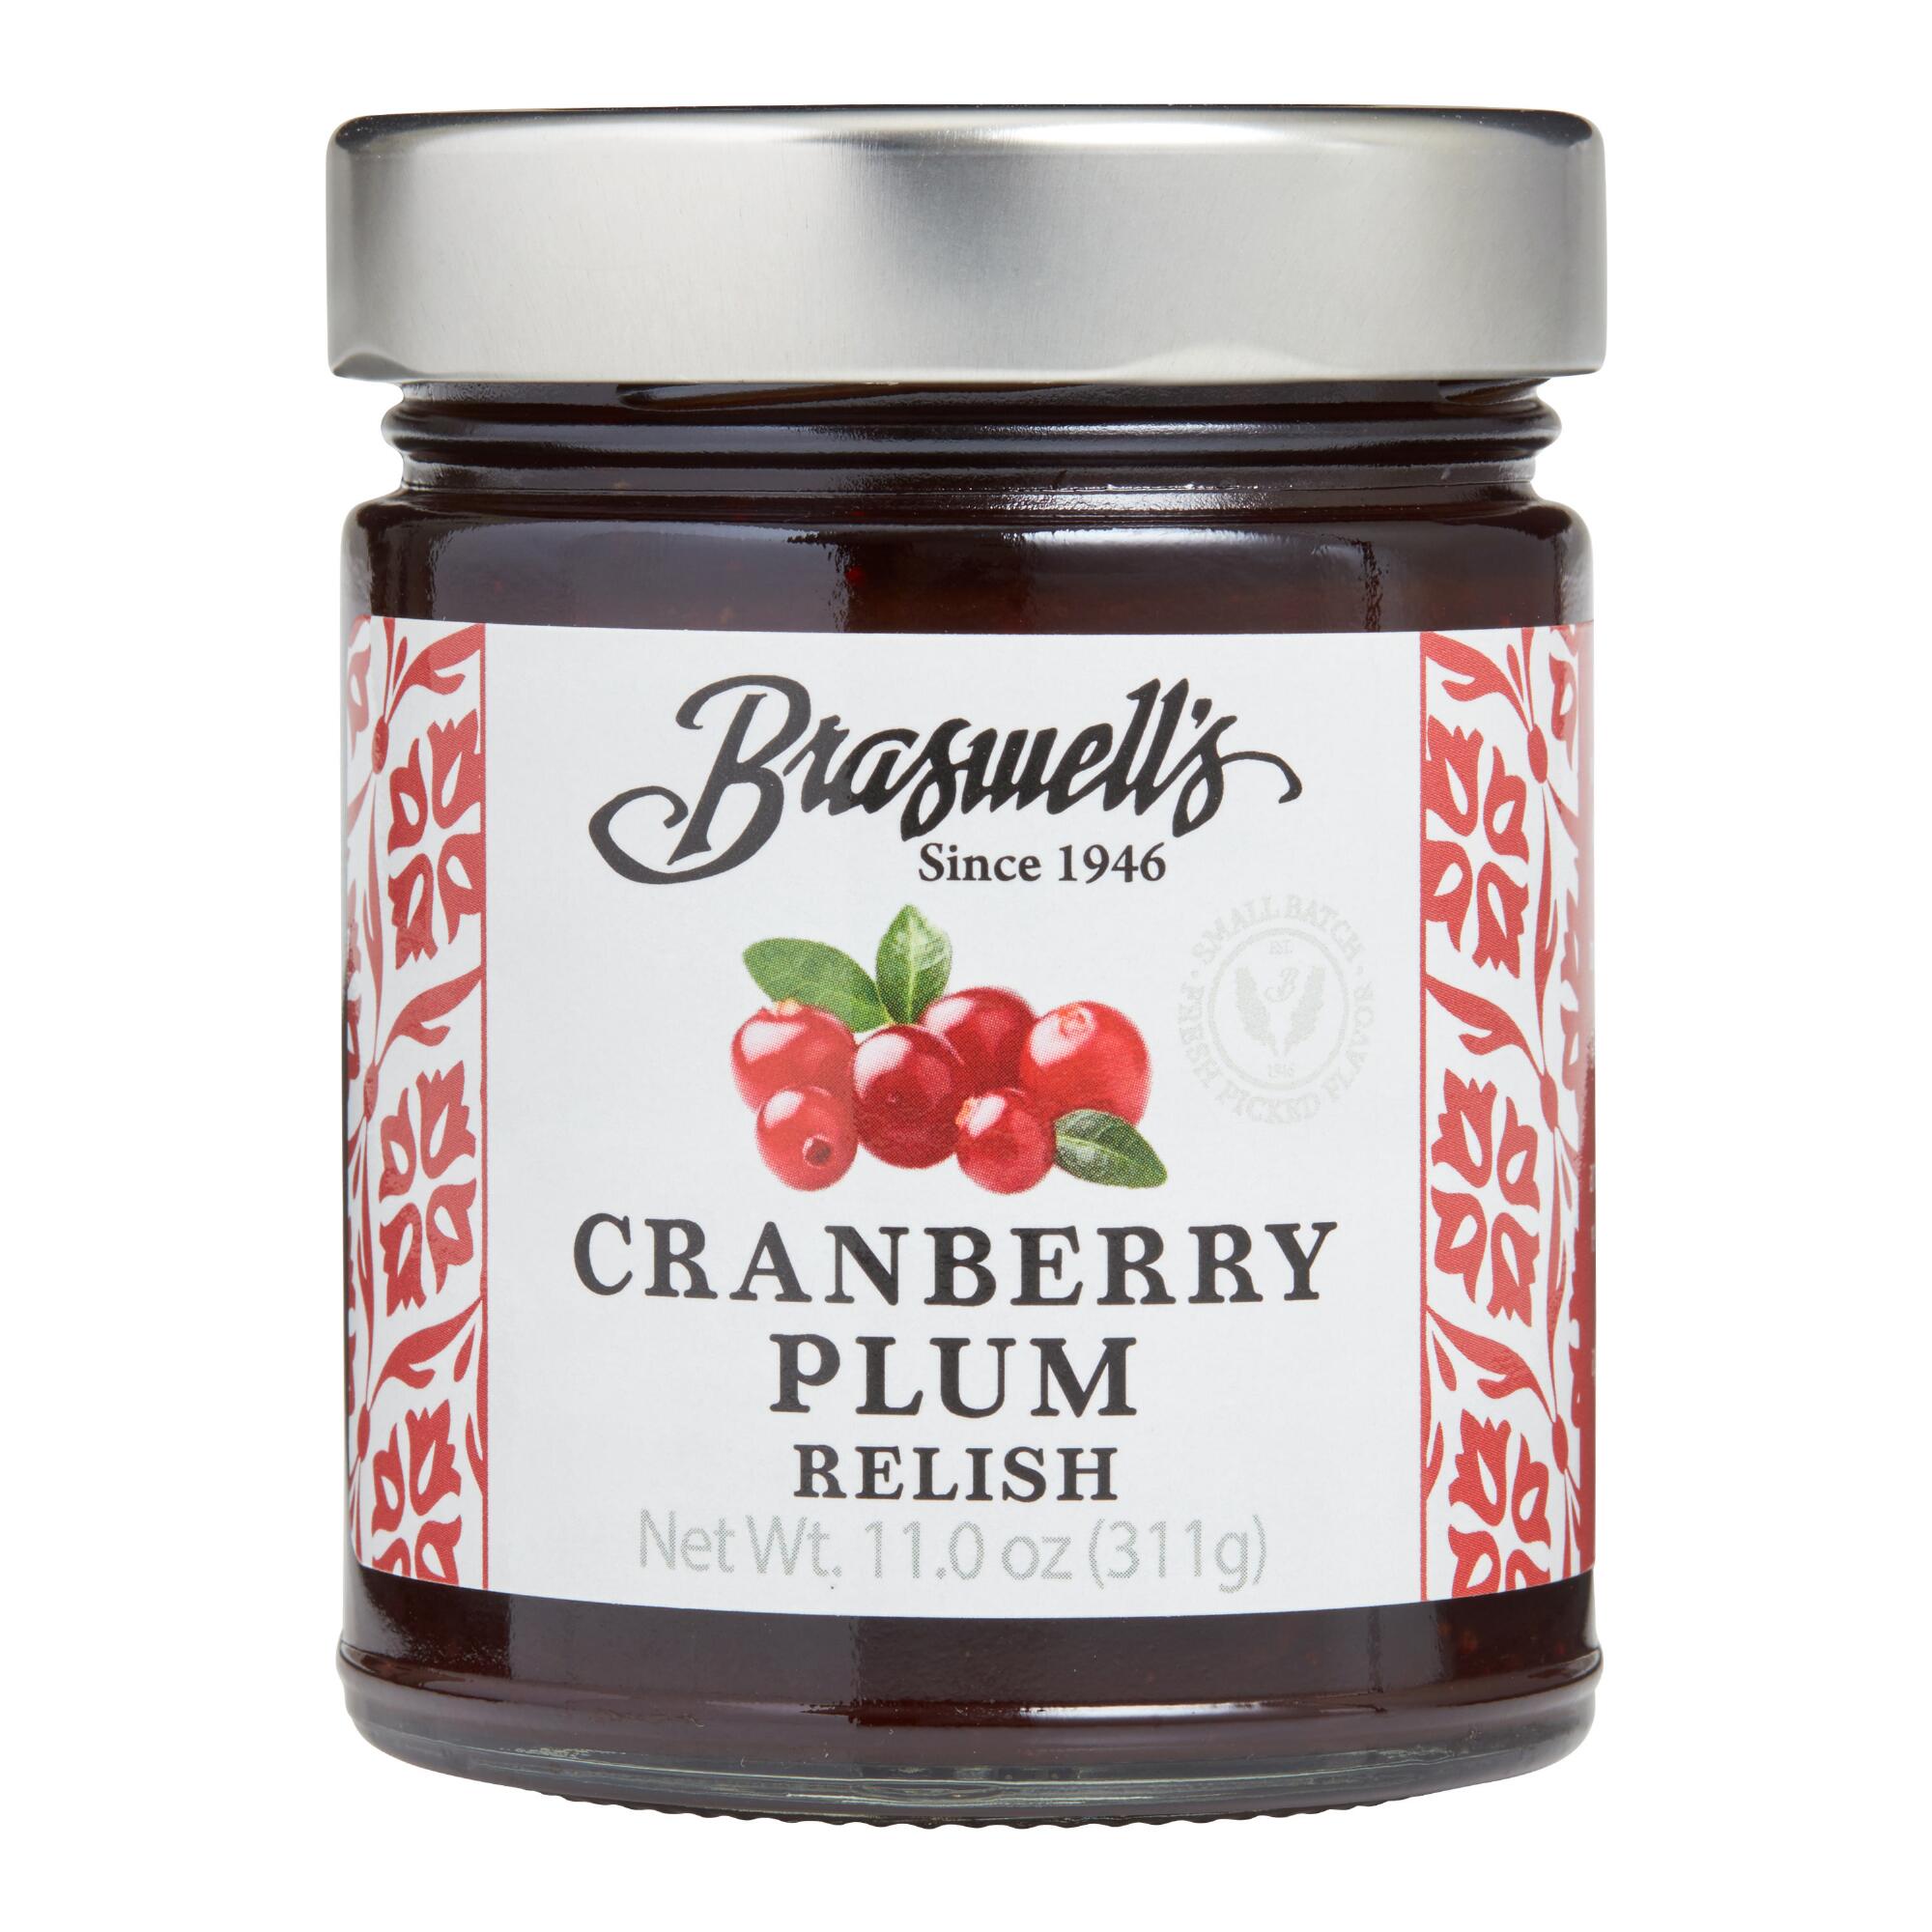 Braswell's Cranberry Plum Relish by World Market